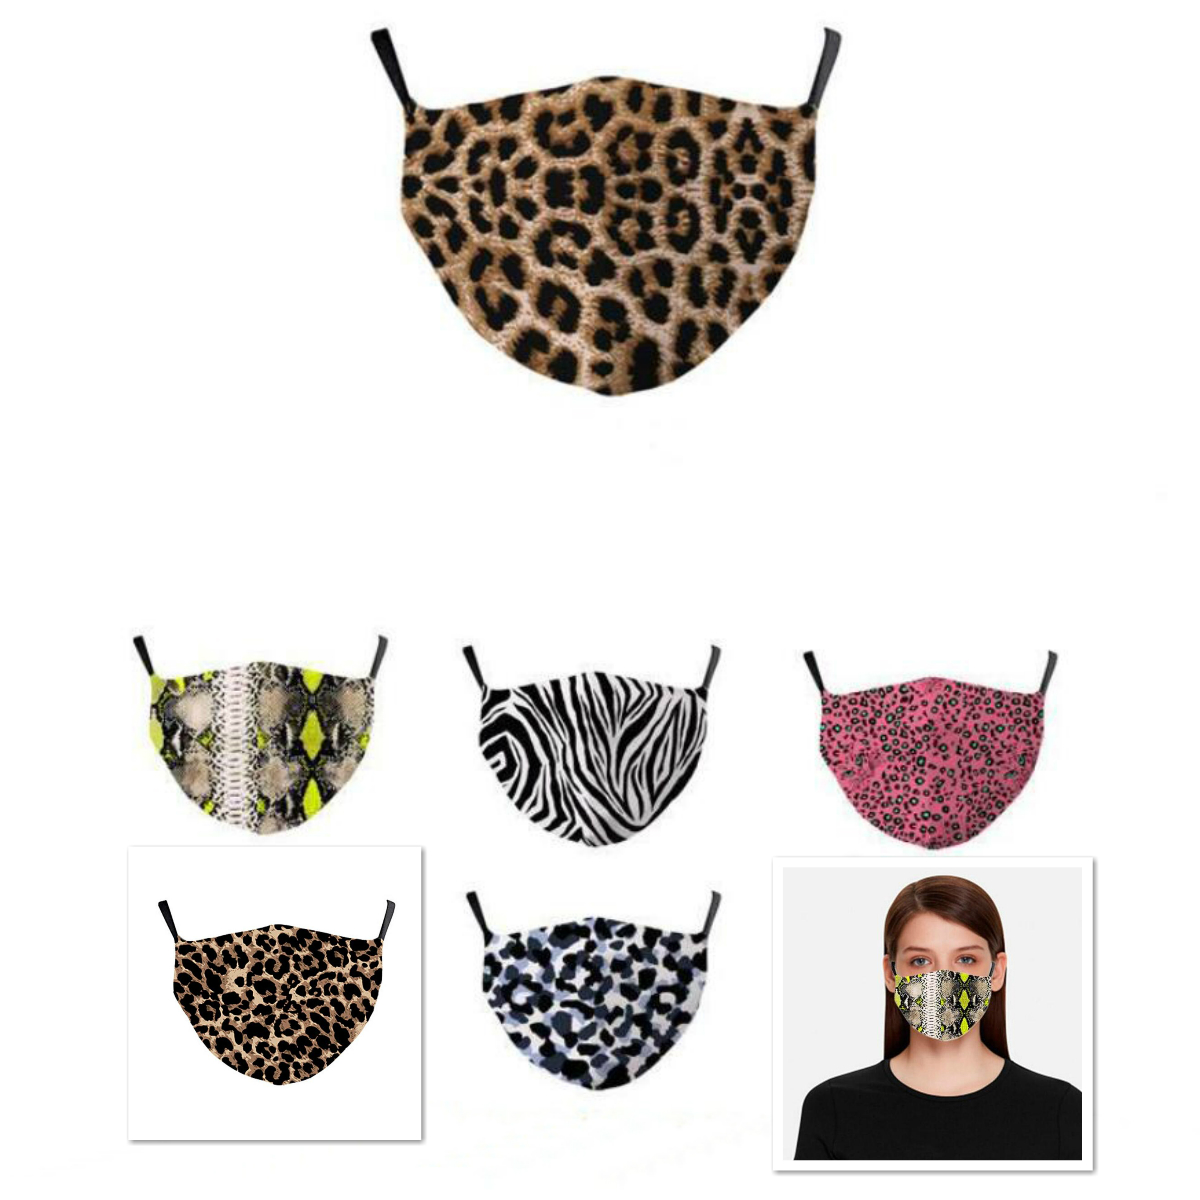 

3D Leopard Print Face Mask Cotton Cloth Sunproof Dustproof Anti-fog Haze Mouth-muffle Cover Trendy Unisex Breathable Respirator Mask Gift